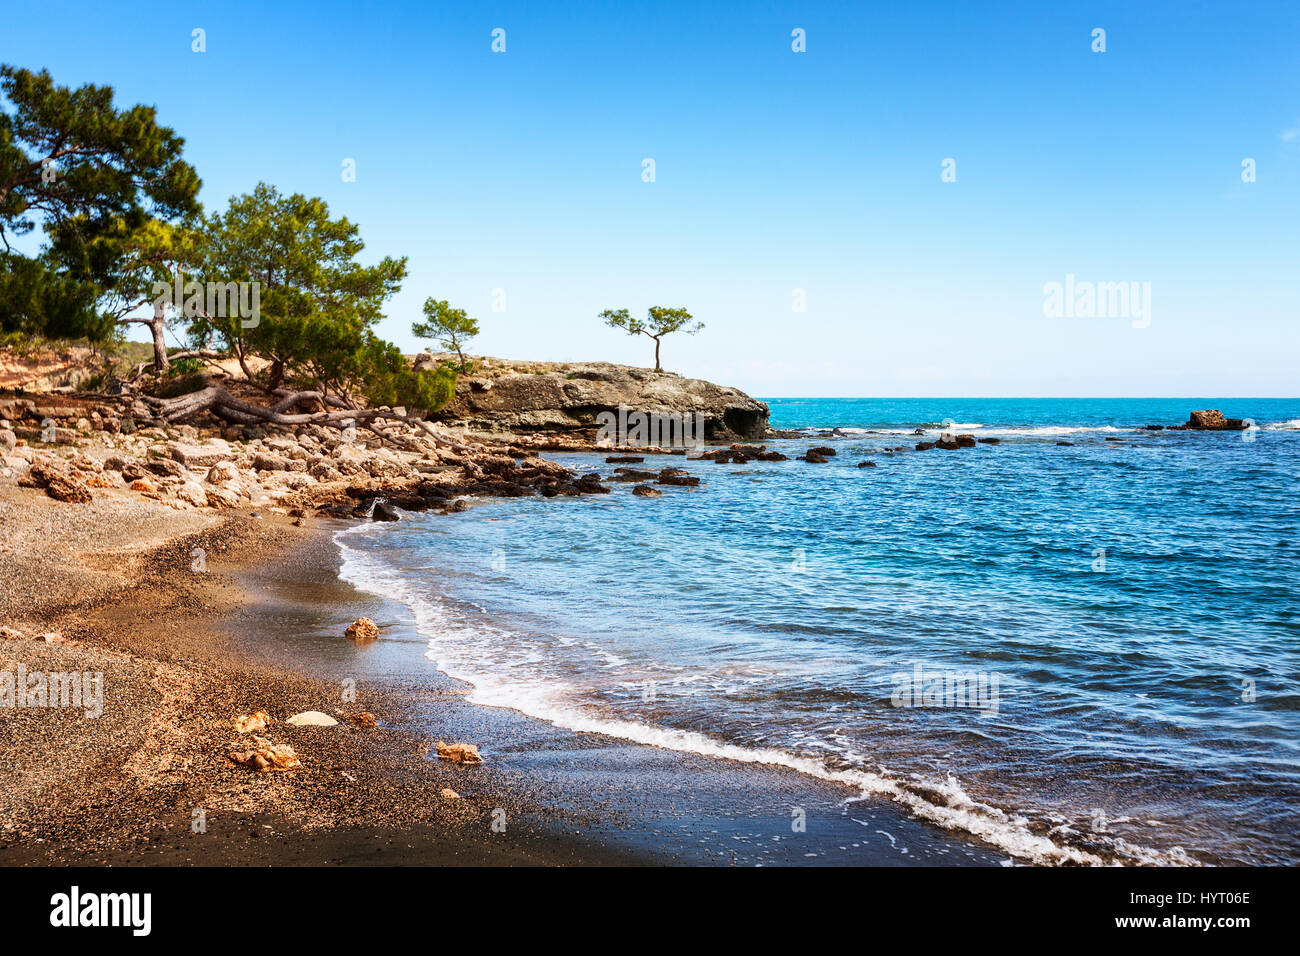 Spring landscape with beach, pines and ruins of ancient city Phaselis, Turkey, travel destination Stock Photo